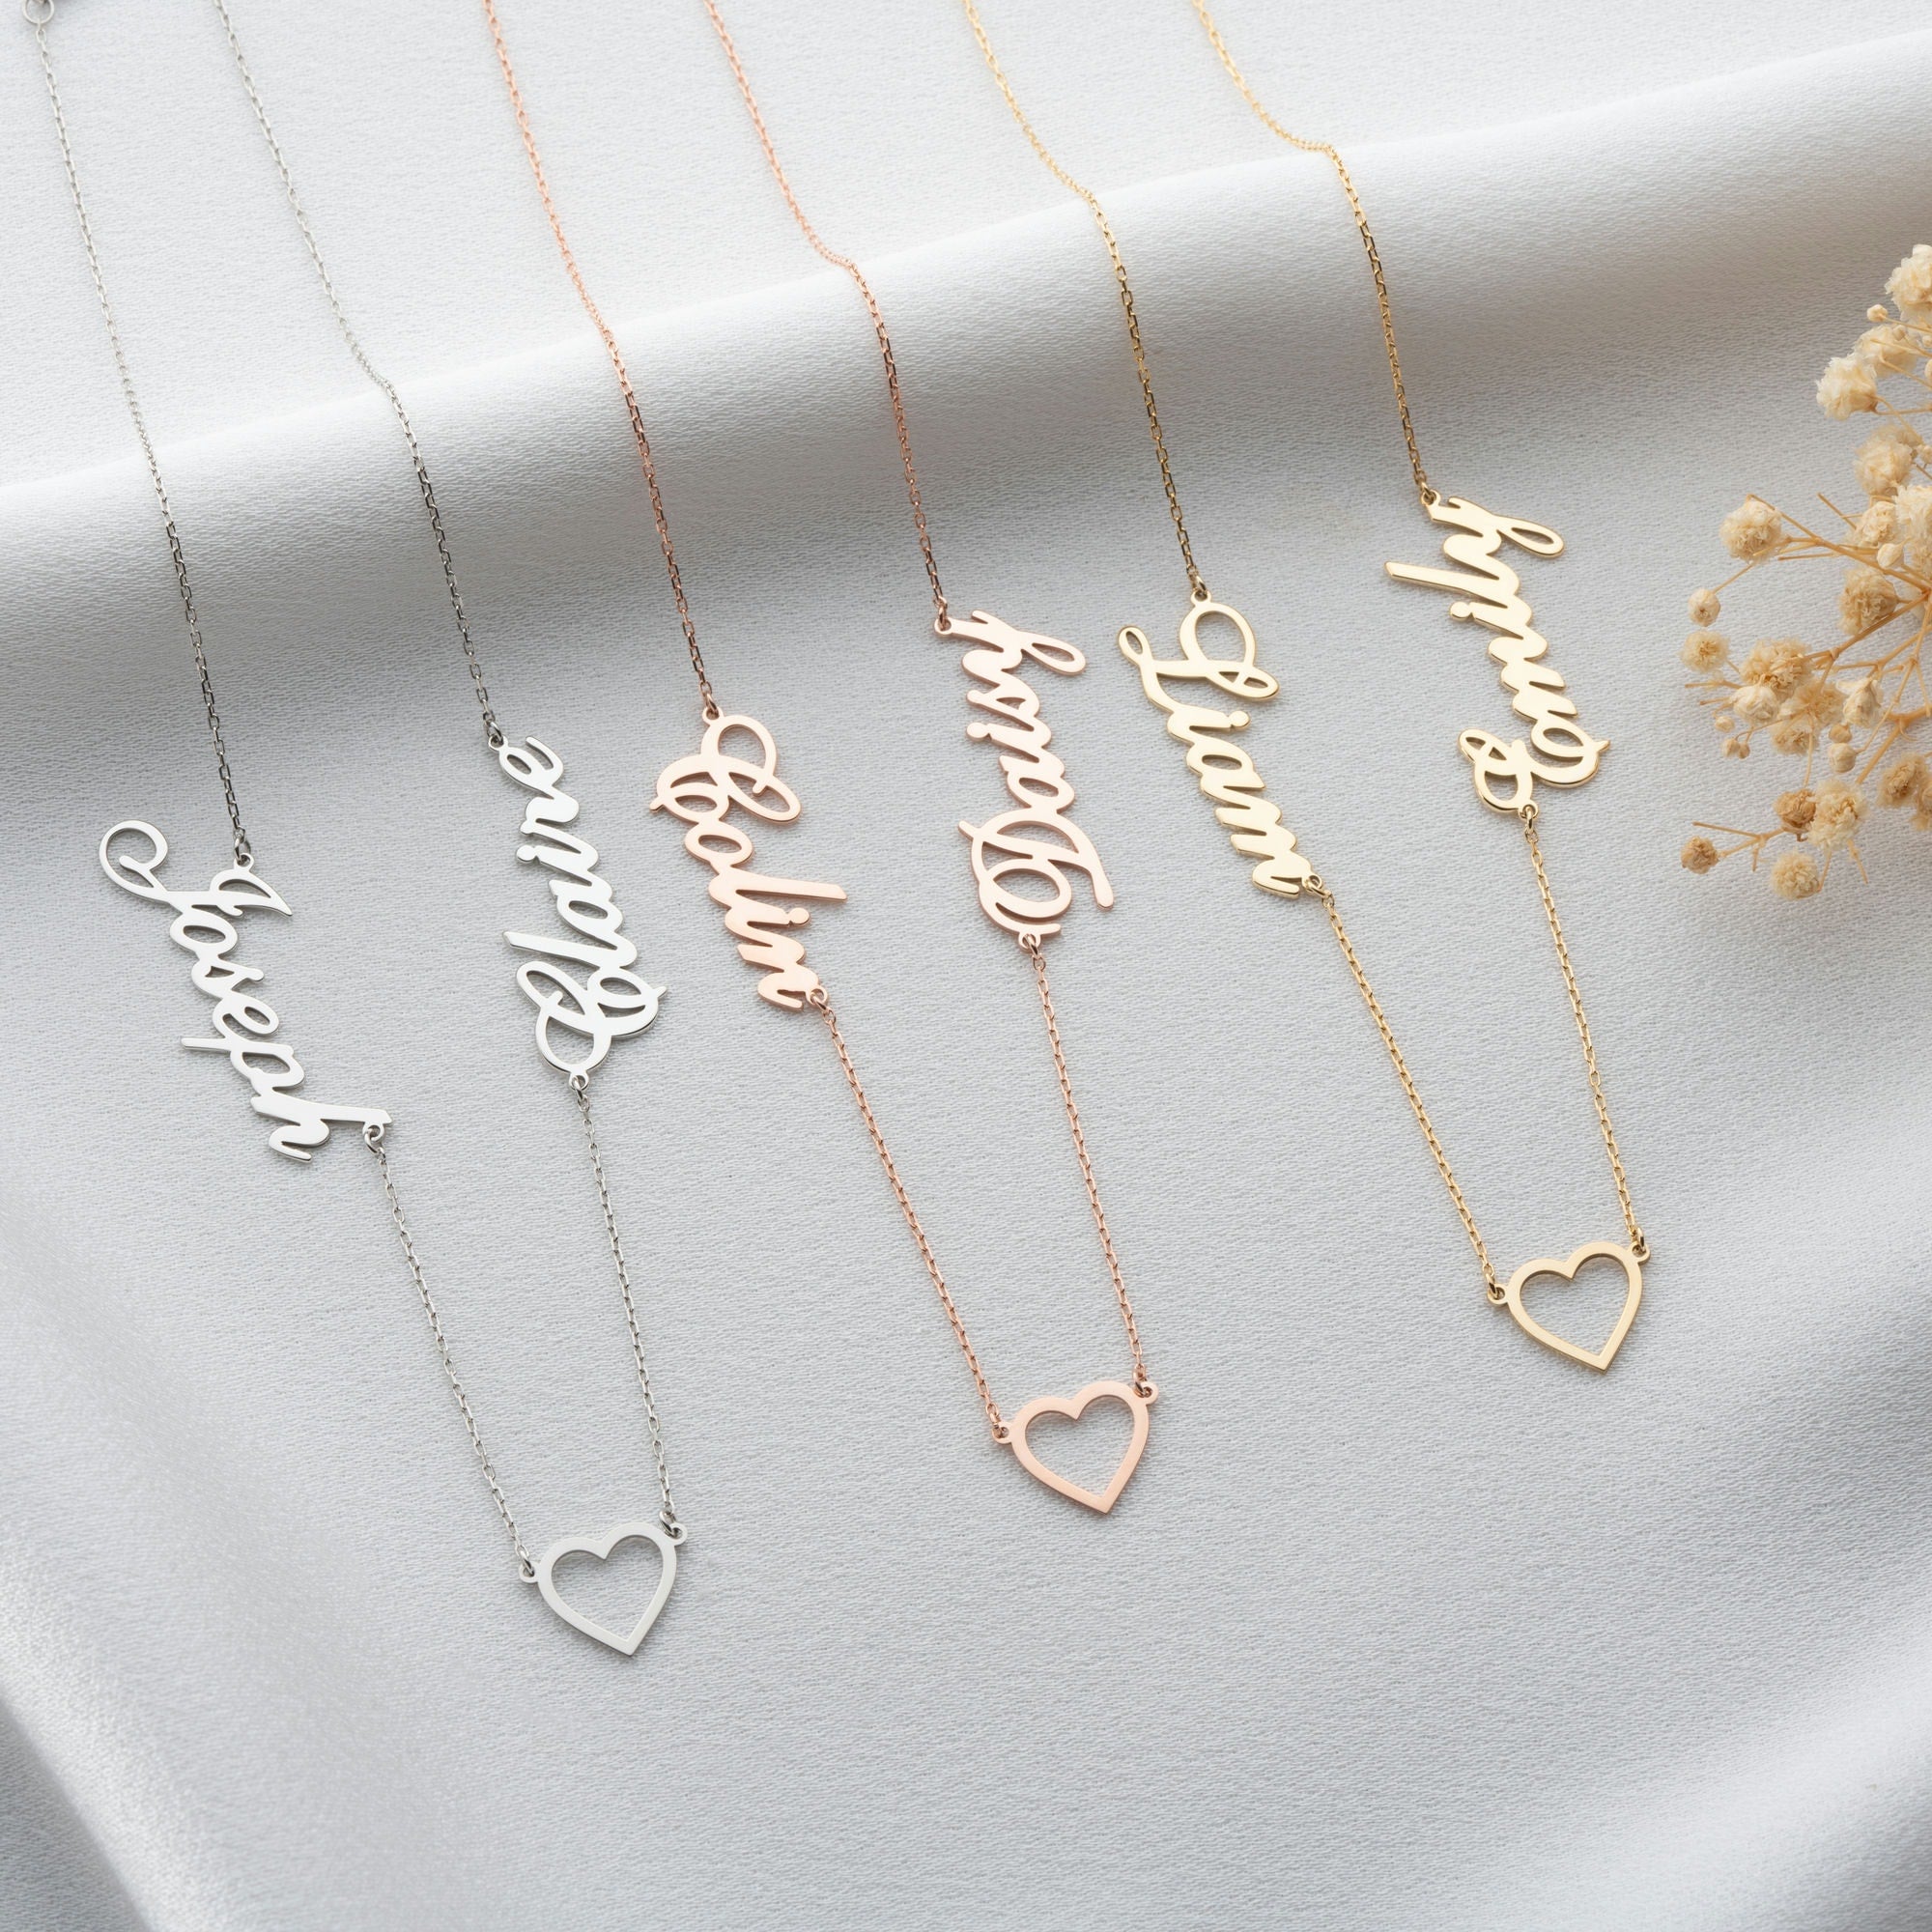 Lovers Heart Name Necklace for Couples